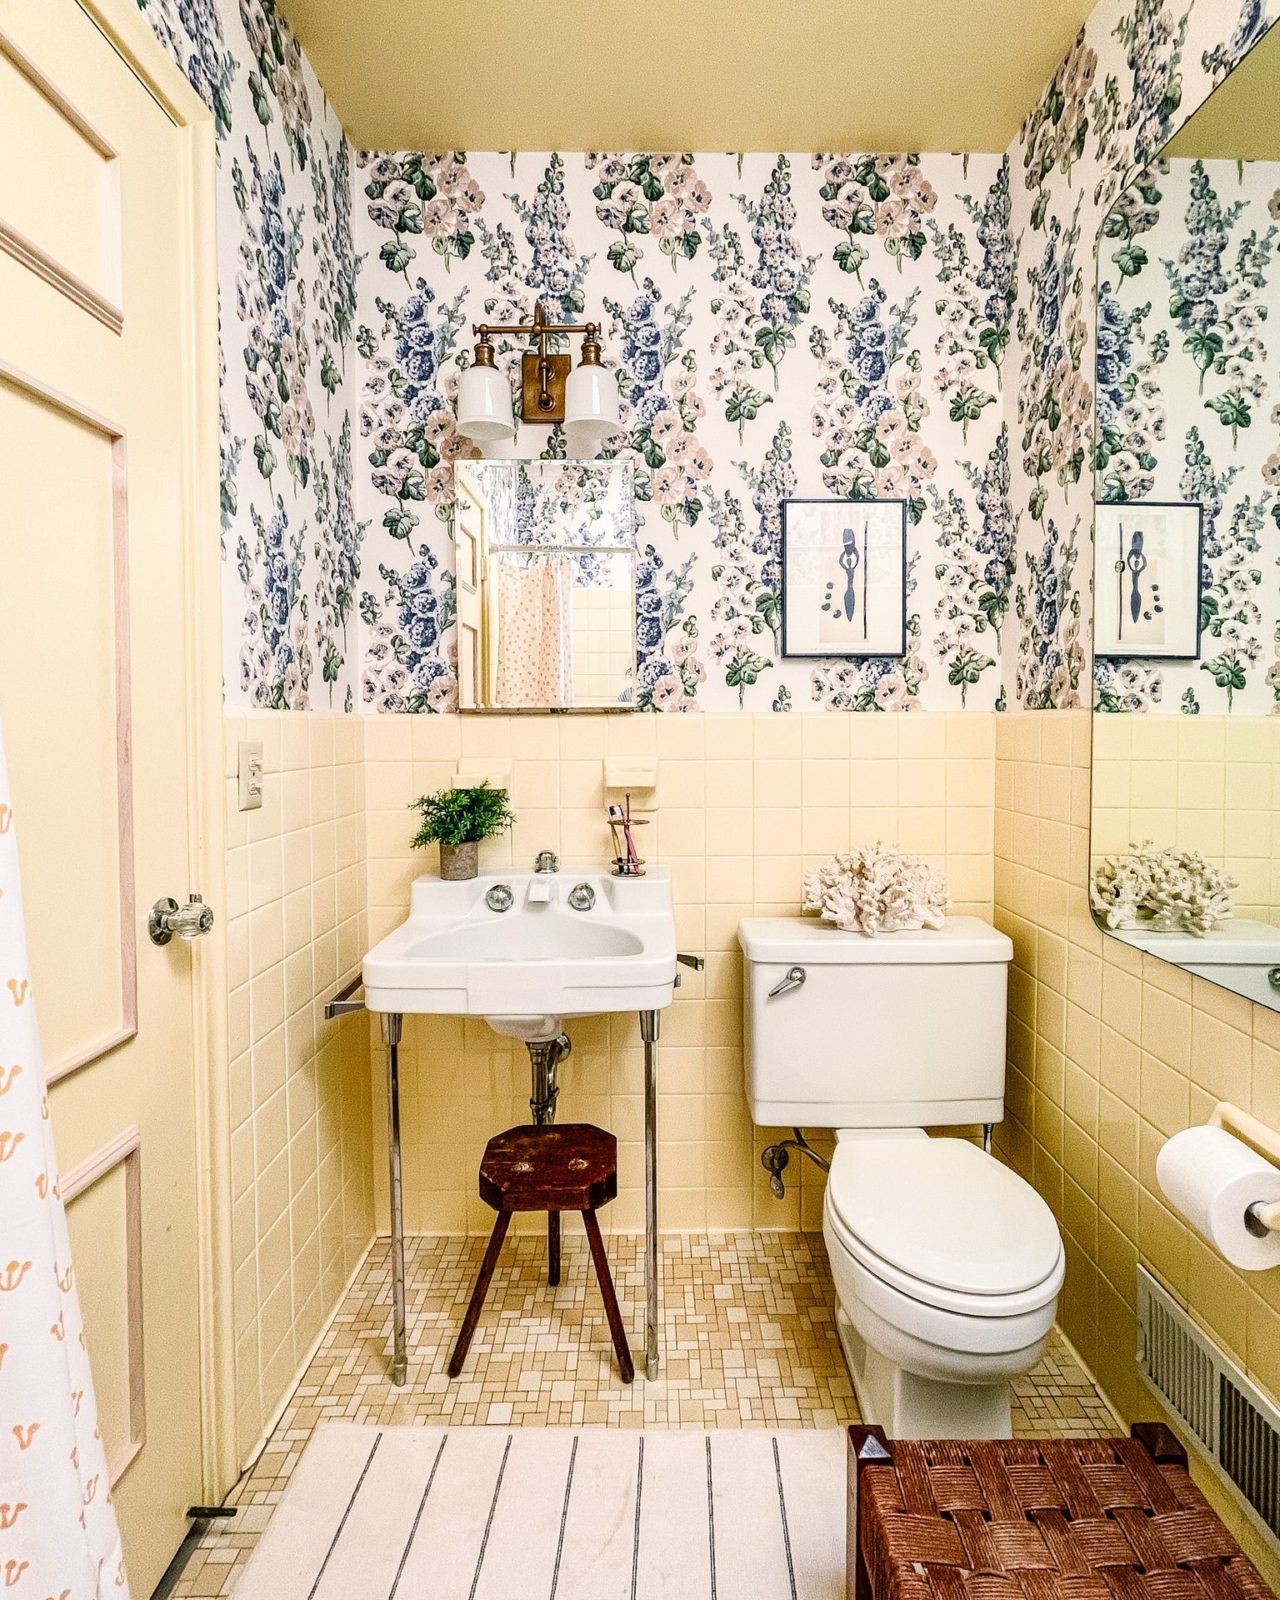 It's Here! Take a Look at the Design Reveal of Our Yellow Bathroom | Wit & Delight